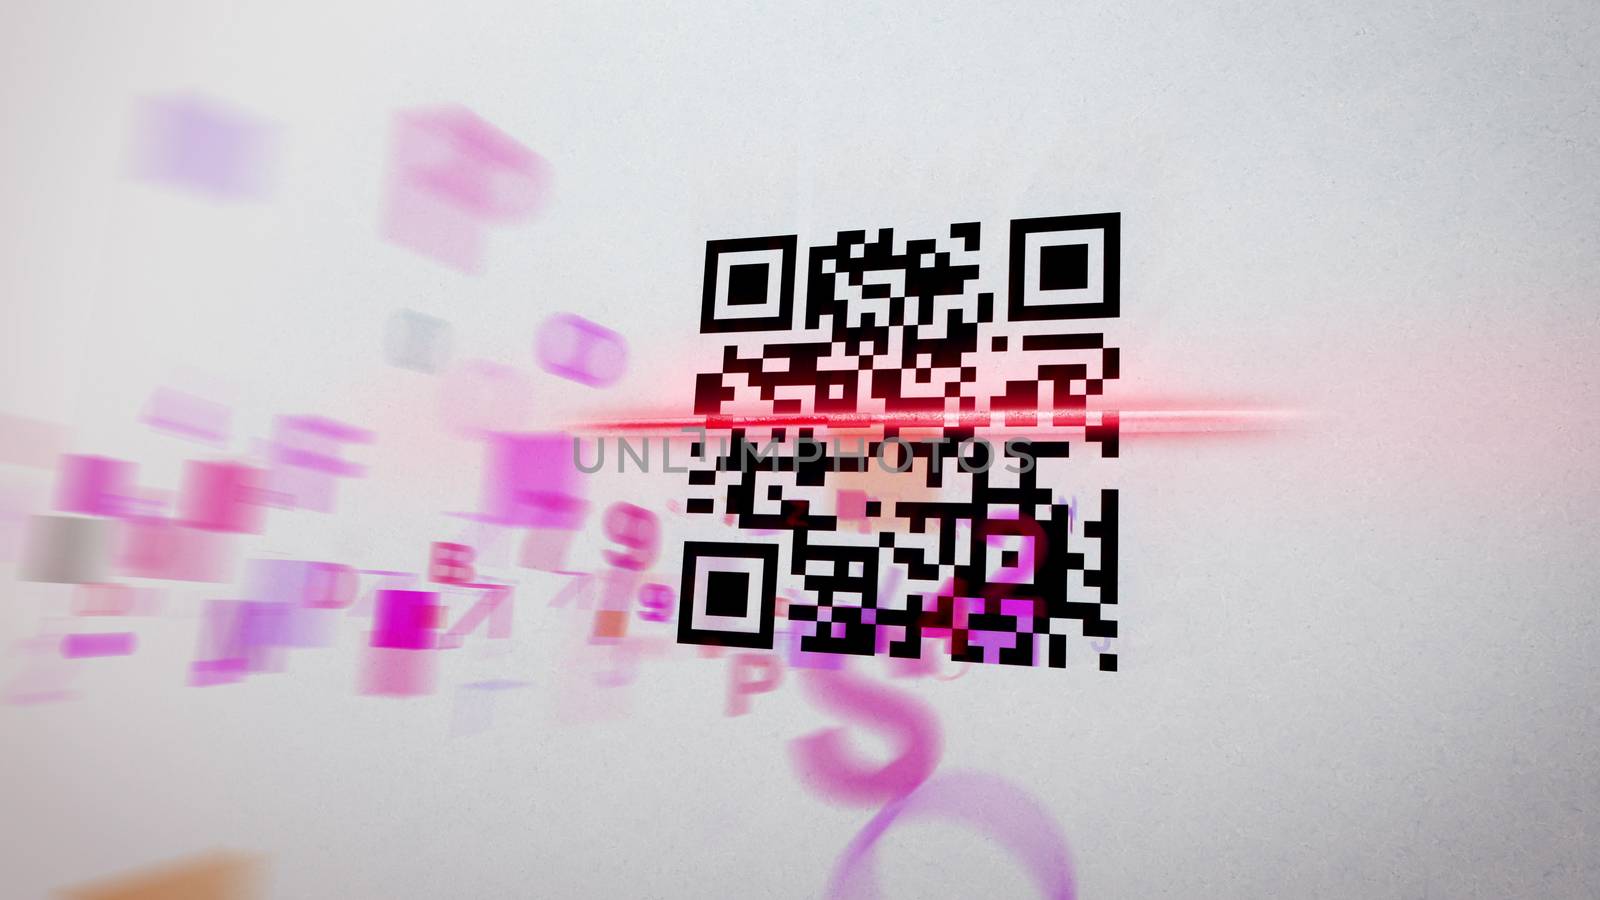 Misty 3d illustration of an abstract QR code scanning practice with dashing symbols, numbers, figures of a rosy color. In the middle, the black and white code is pierced with a red laser line